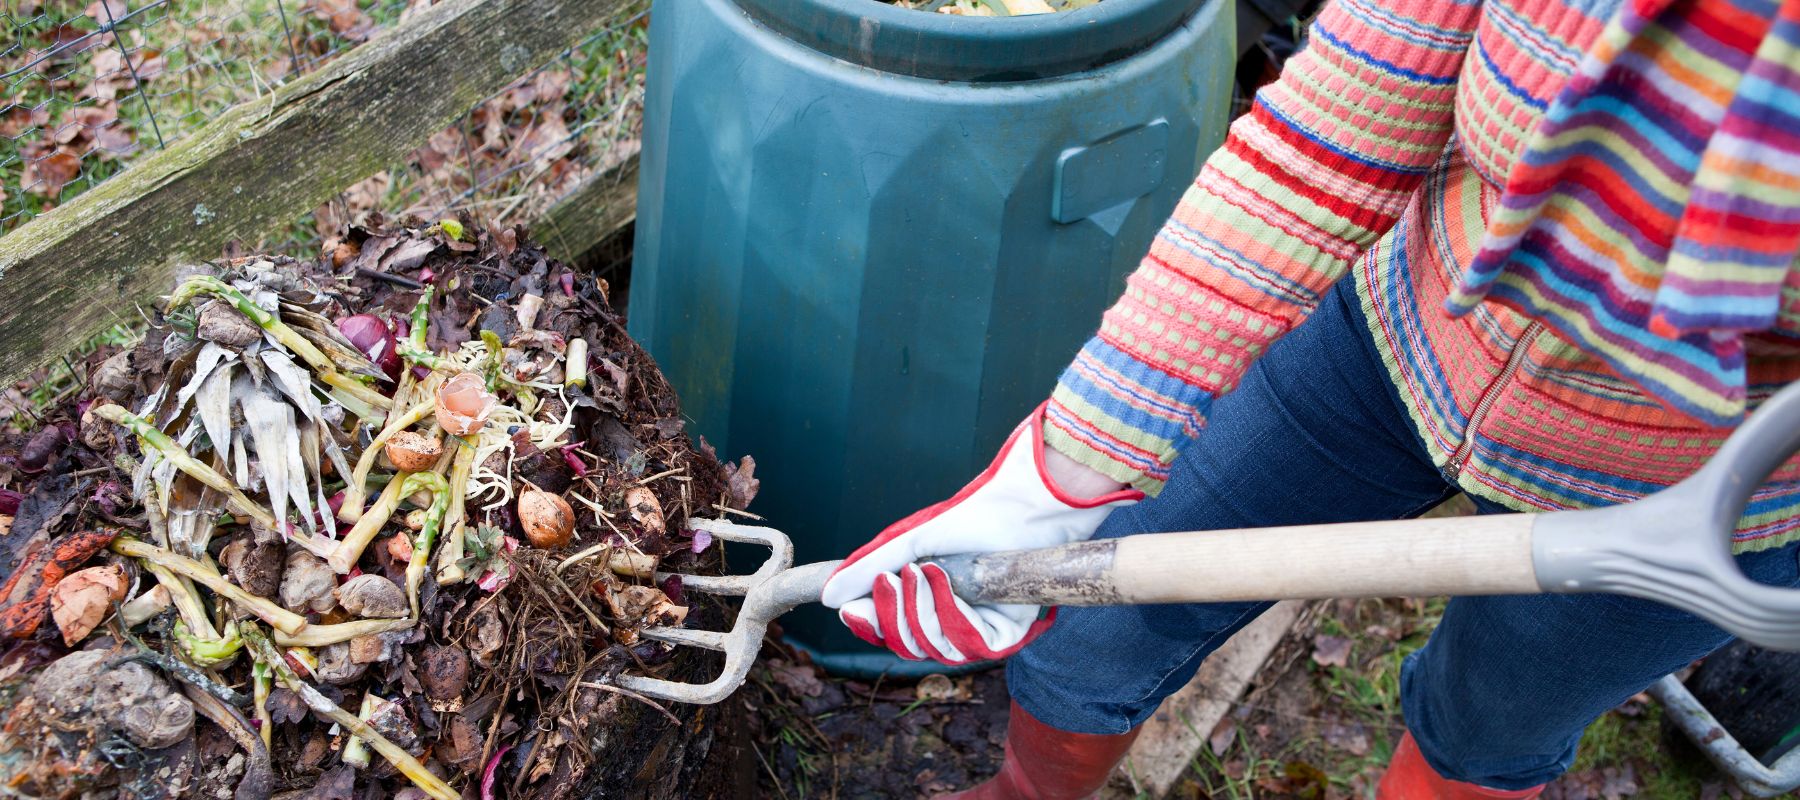 Top 5 Tips for Successful Composting